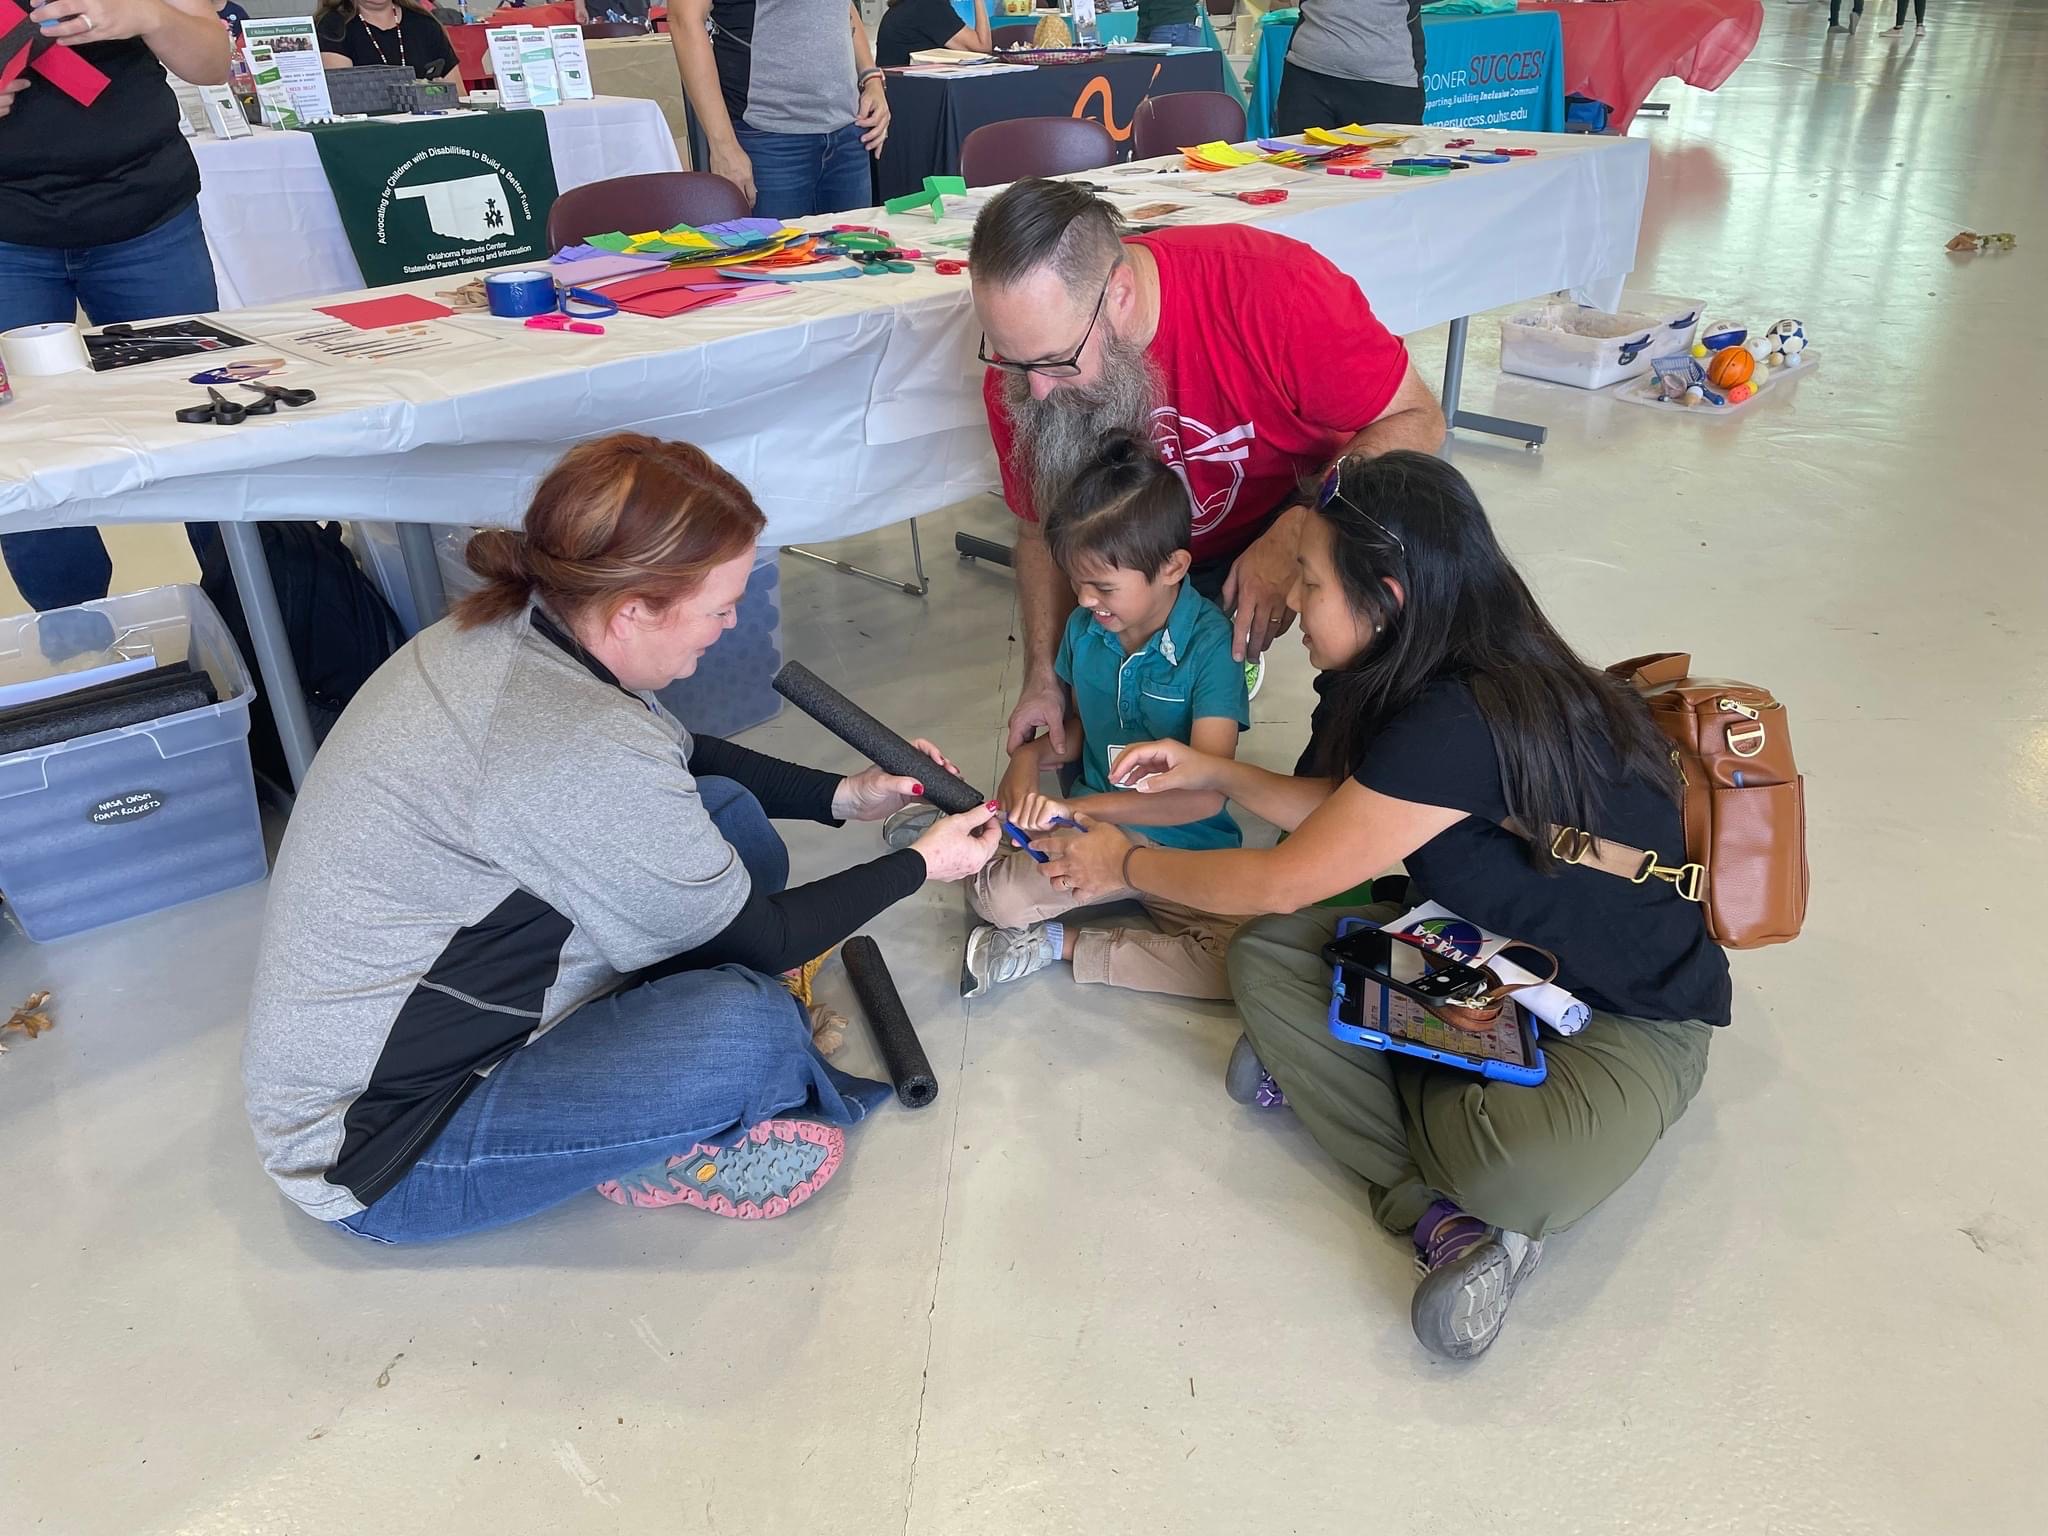 A teacher helps a child with disabilities and their parents build a foam rocket during a STEM event in Oklahoma.